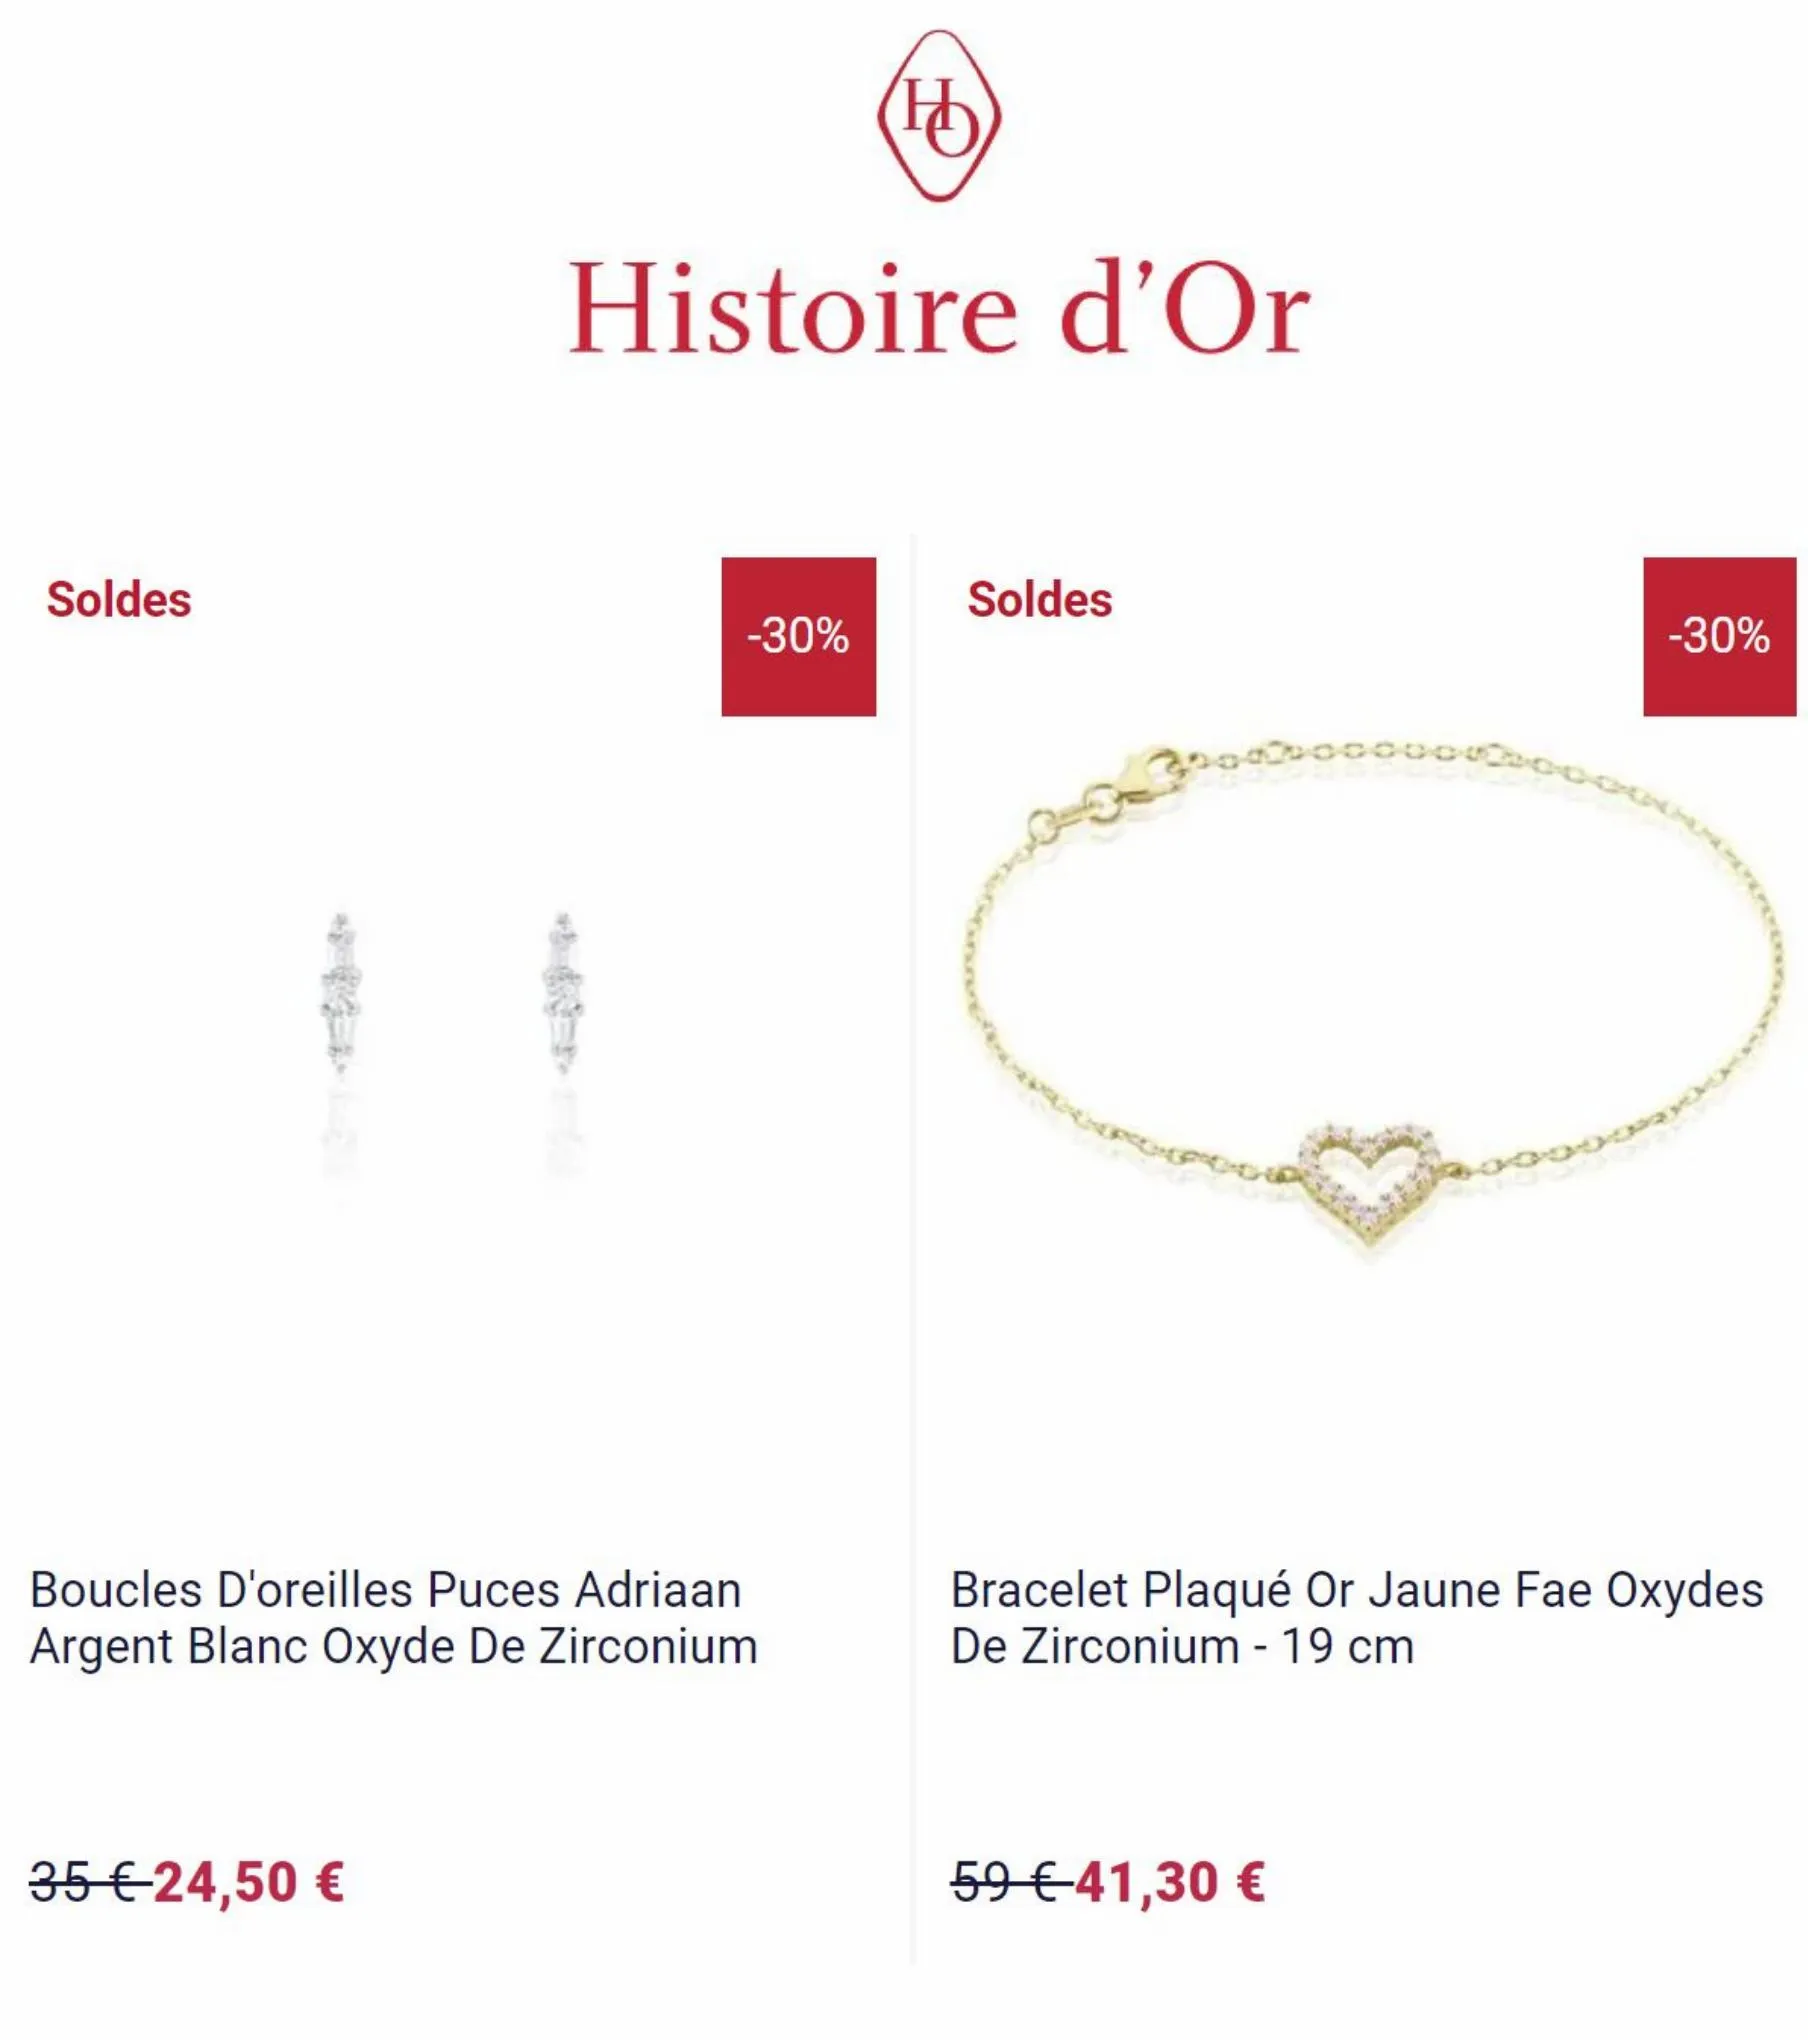 Catalogue Soldes Histoire d'Or, page 00004